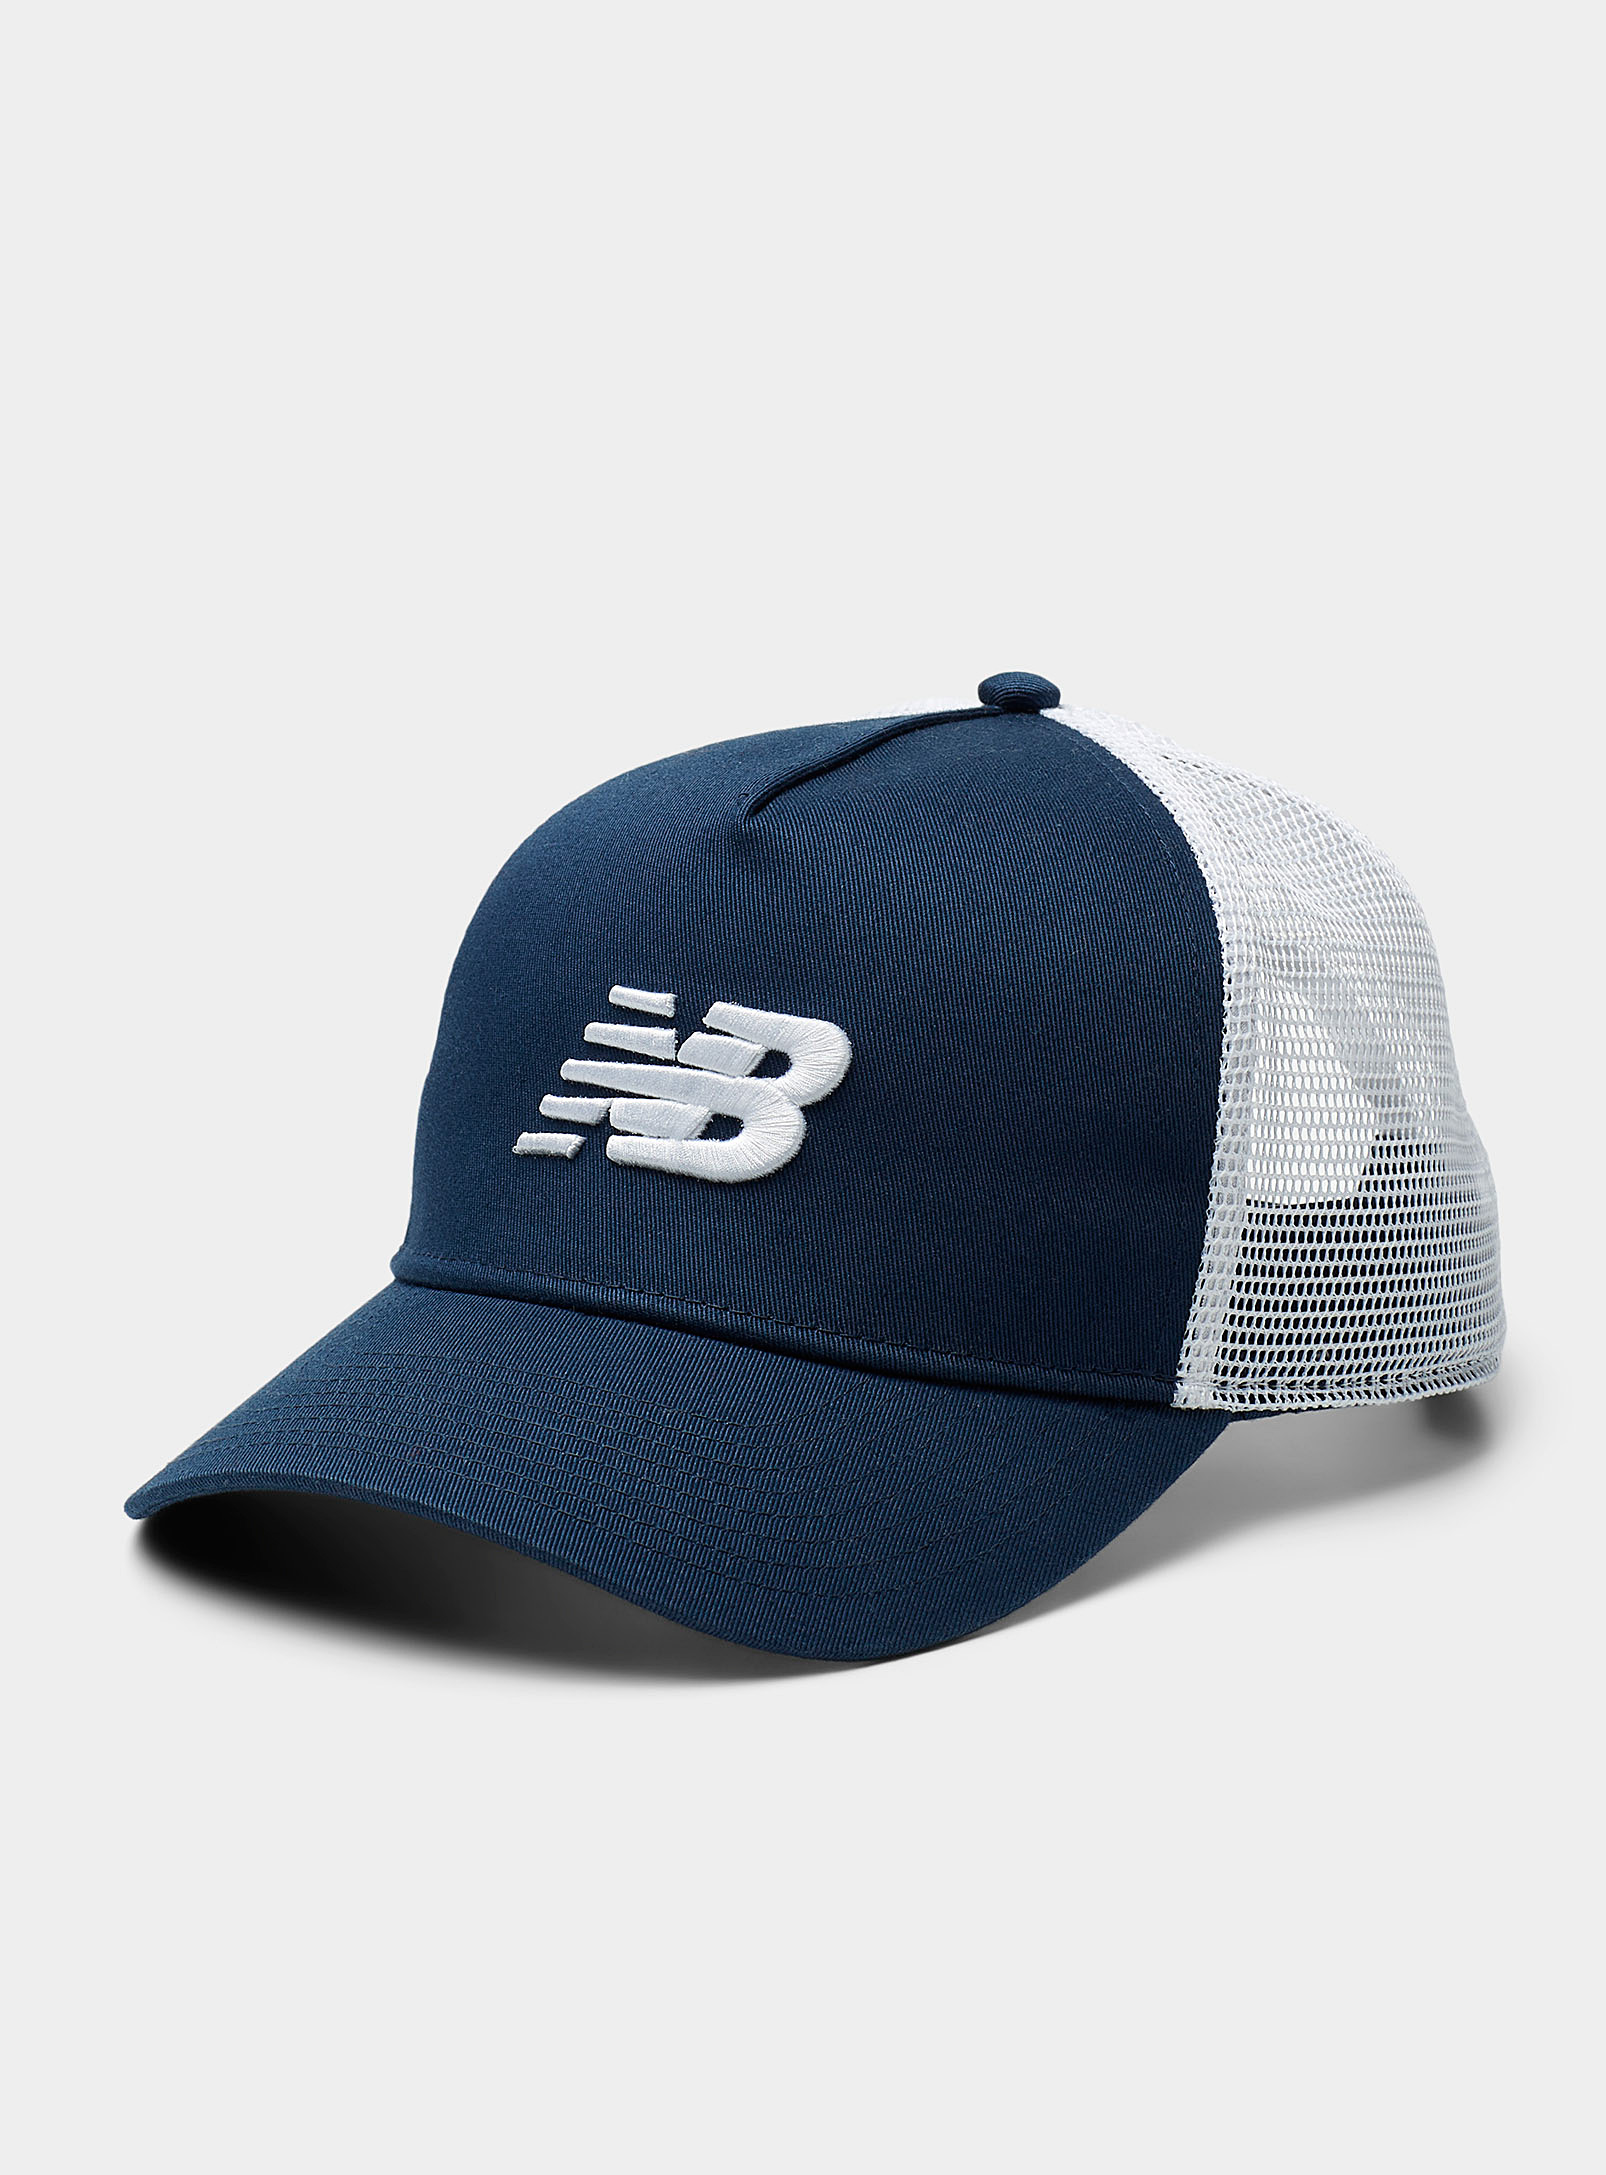 New Balance Embroidered Logo Trucker Cap In Blue